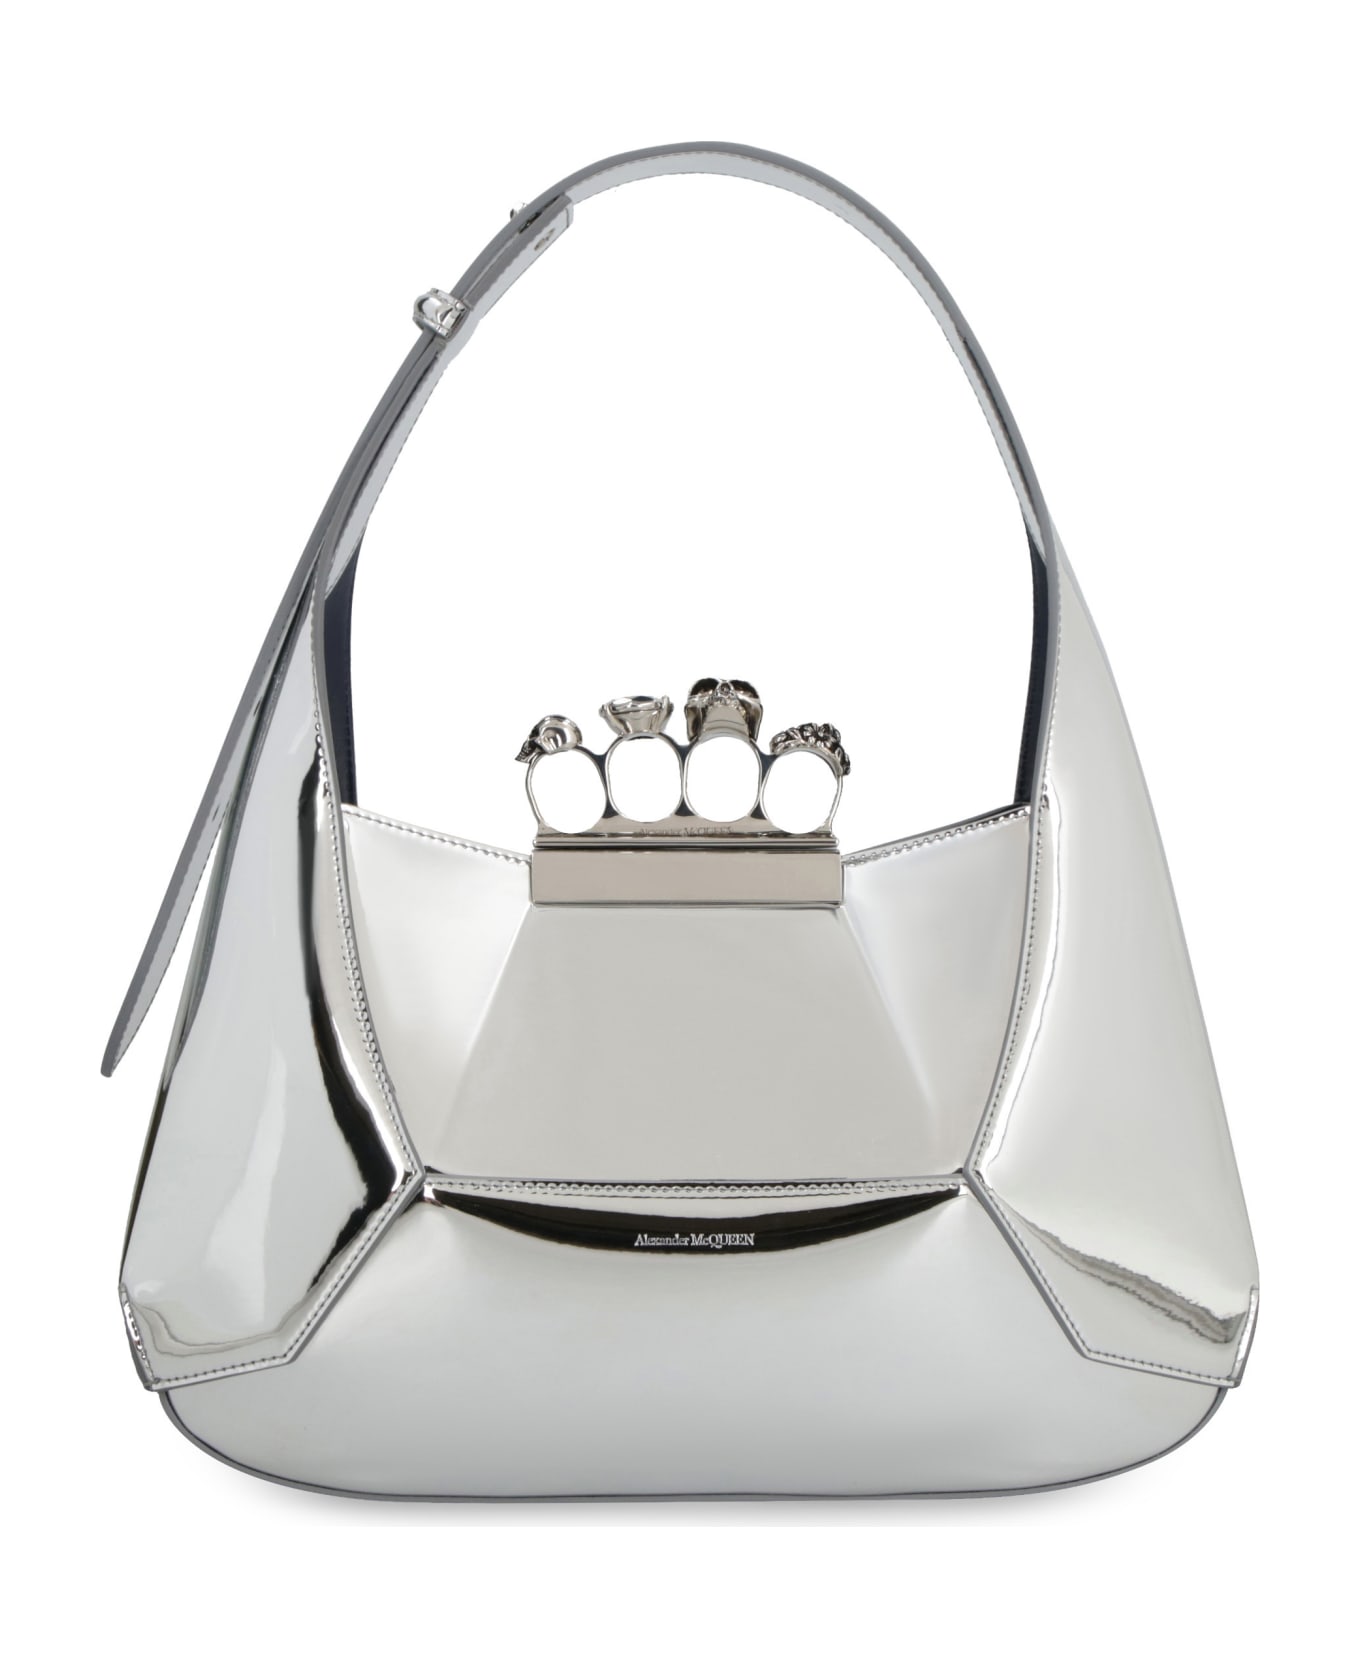 Alexander McQueen Hobo Bag With Four Rings Detail - silver